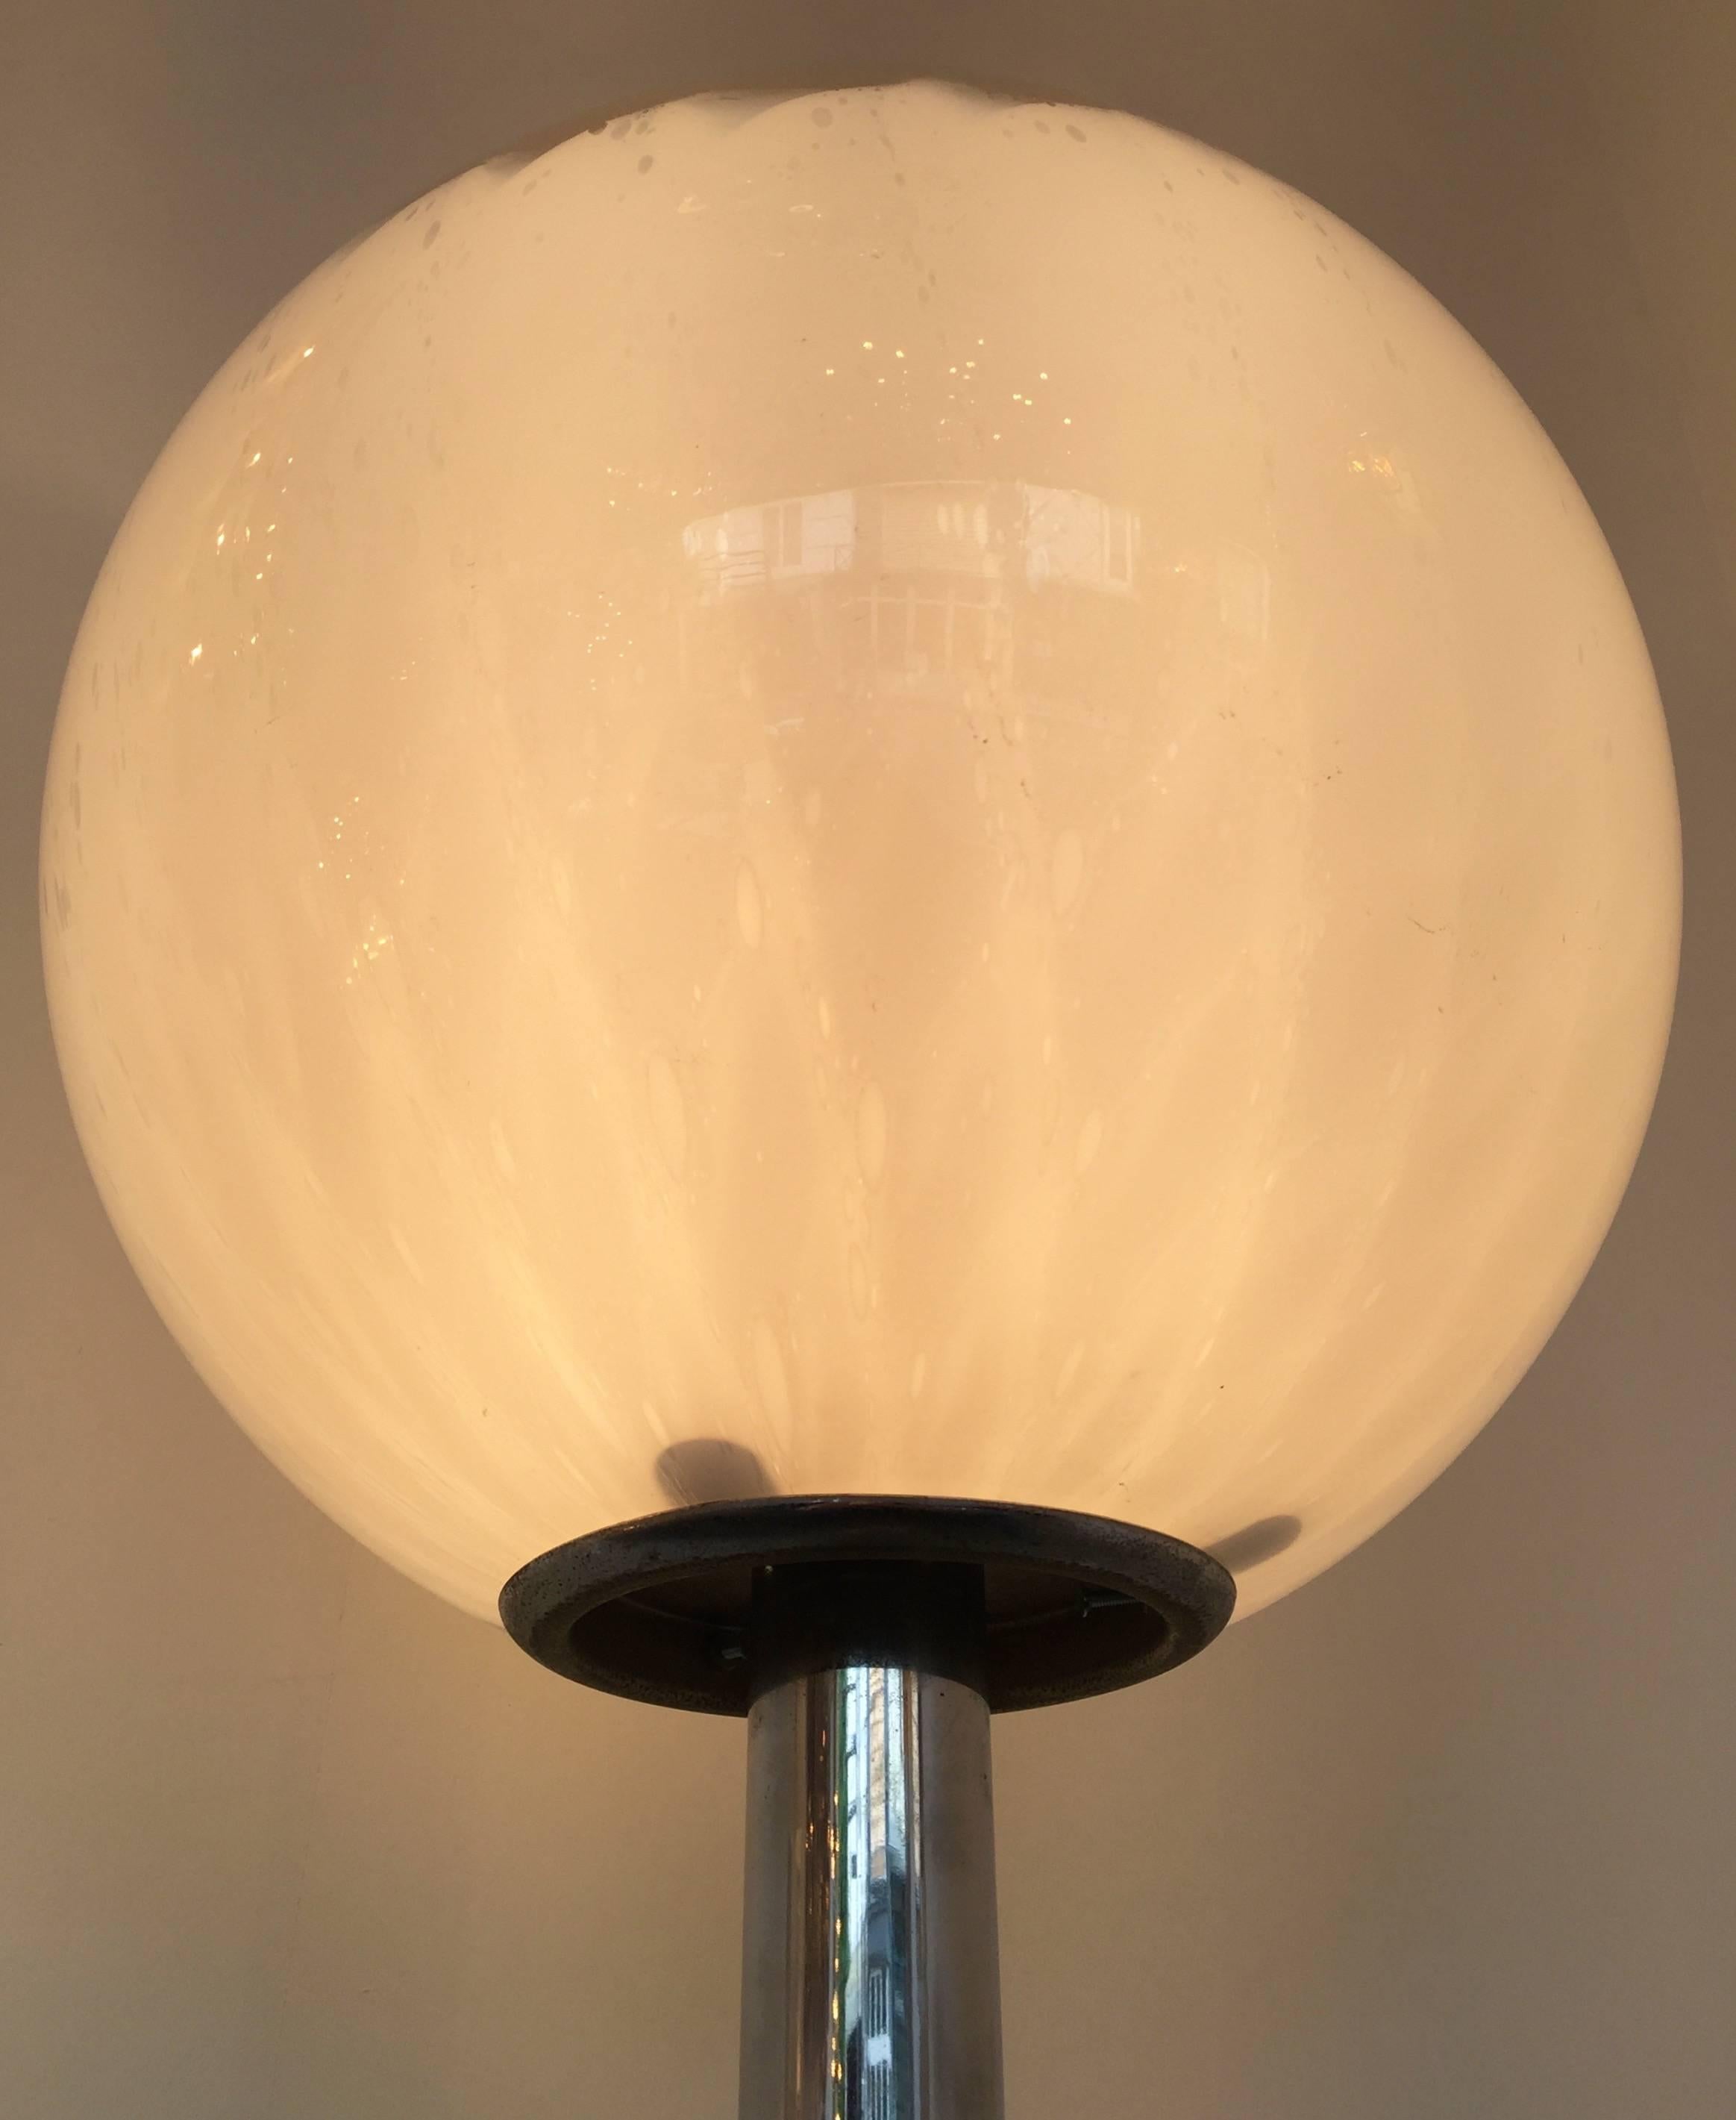 Floor lamp by the editor La Murrina Murano, blown glass ball typical from the manufacture with those bubble in the glass. Chrome structure. Simple and elegant. It s a famous maker like Mazzega, Carlo Nason, Venini, Vistosi, Seguso, Artemide in the